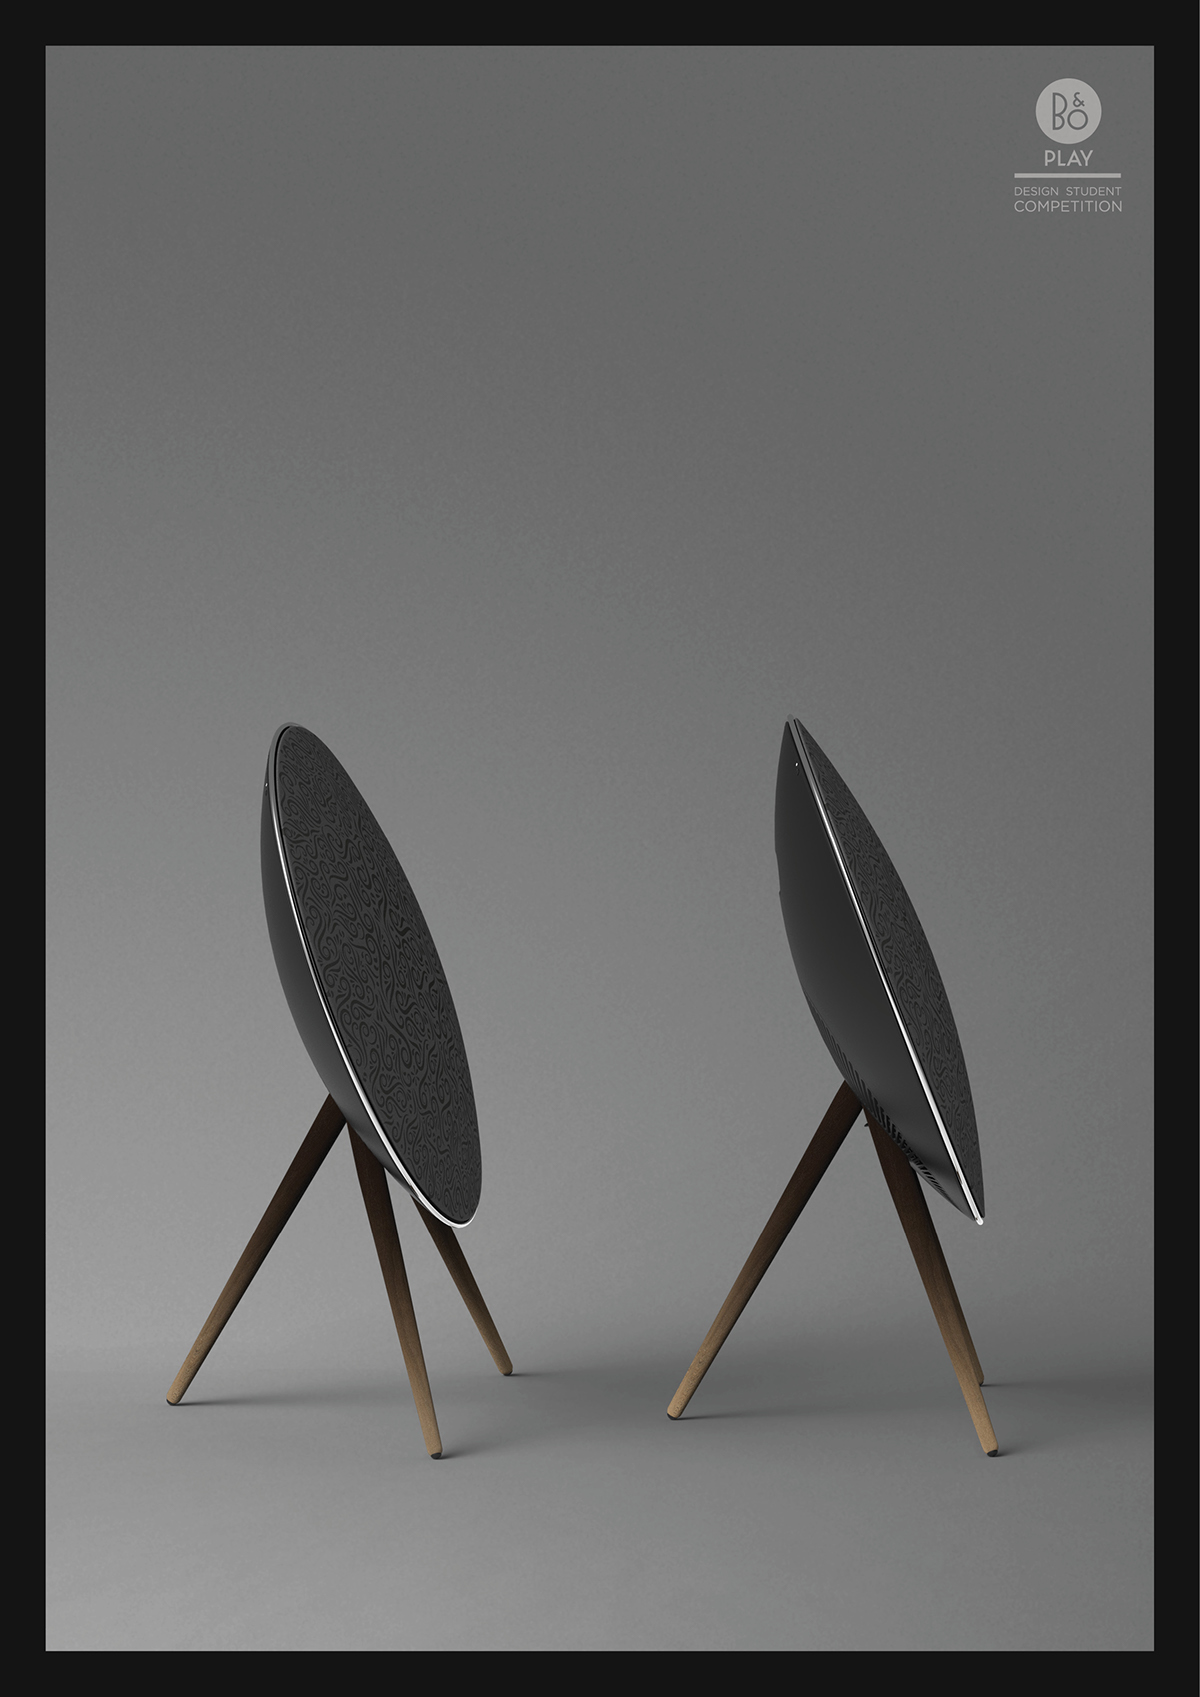 Bang & Olufsen a9 speaker design Competition B&O play BeoPlay